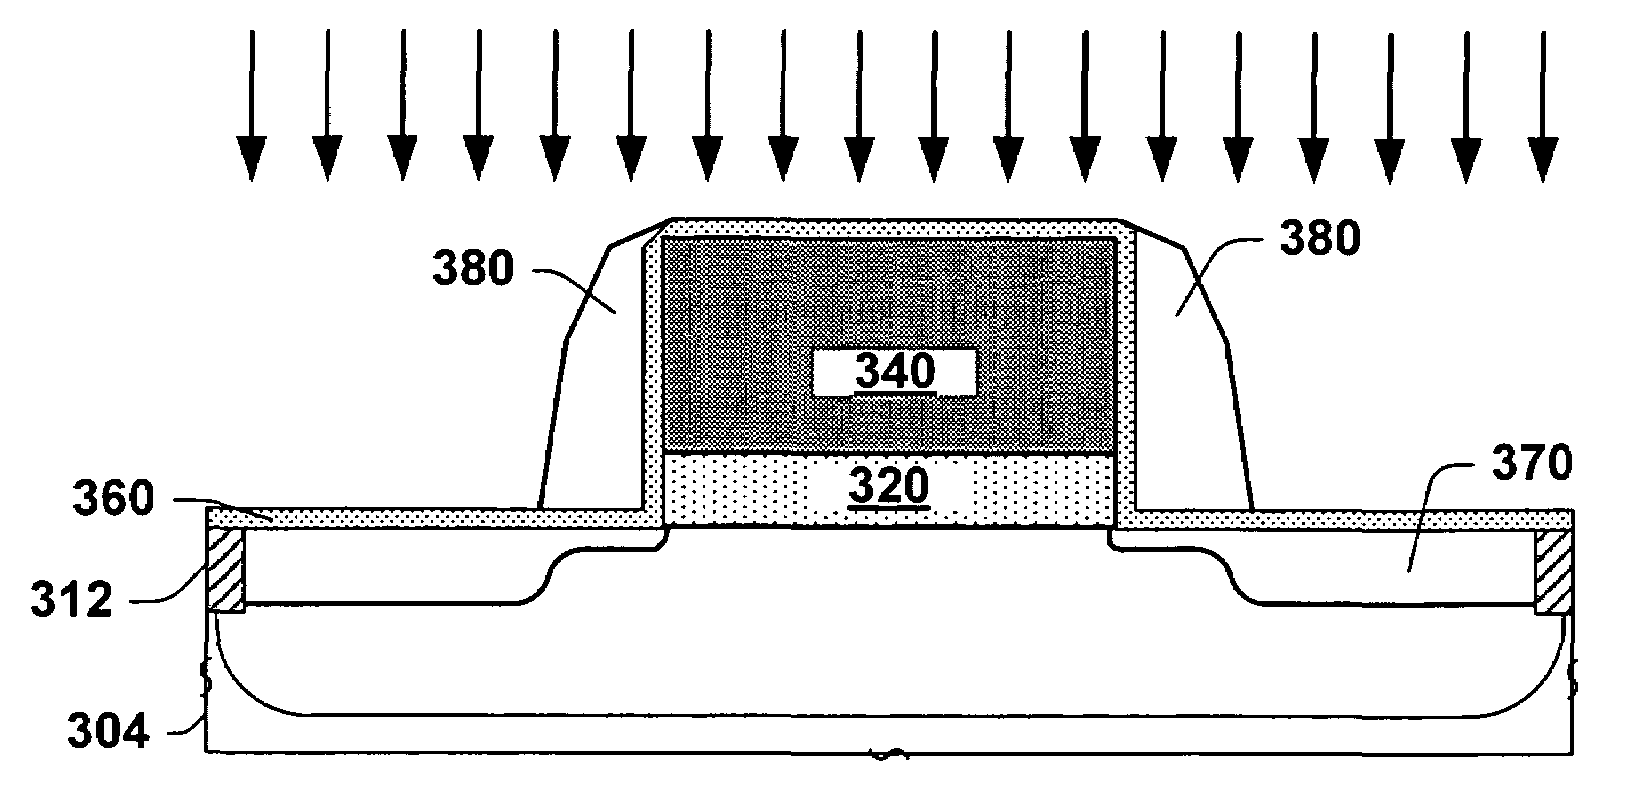 Method for integrating high-k dielectrics in transistor devices